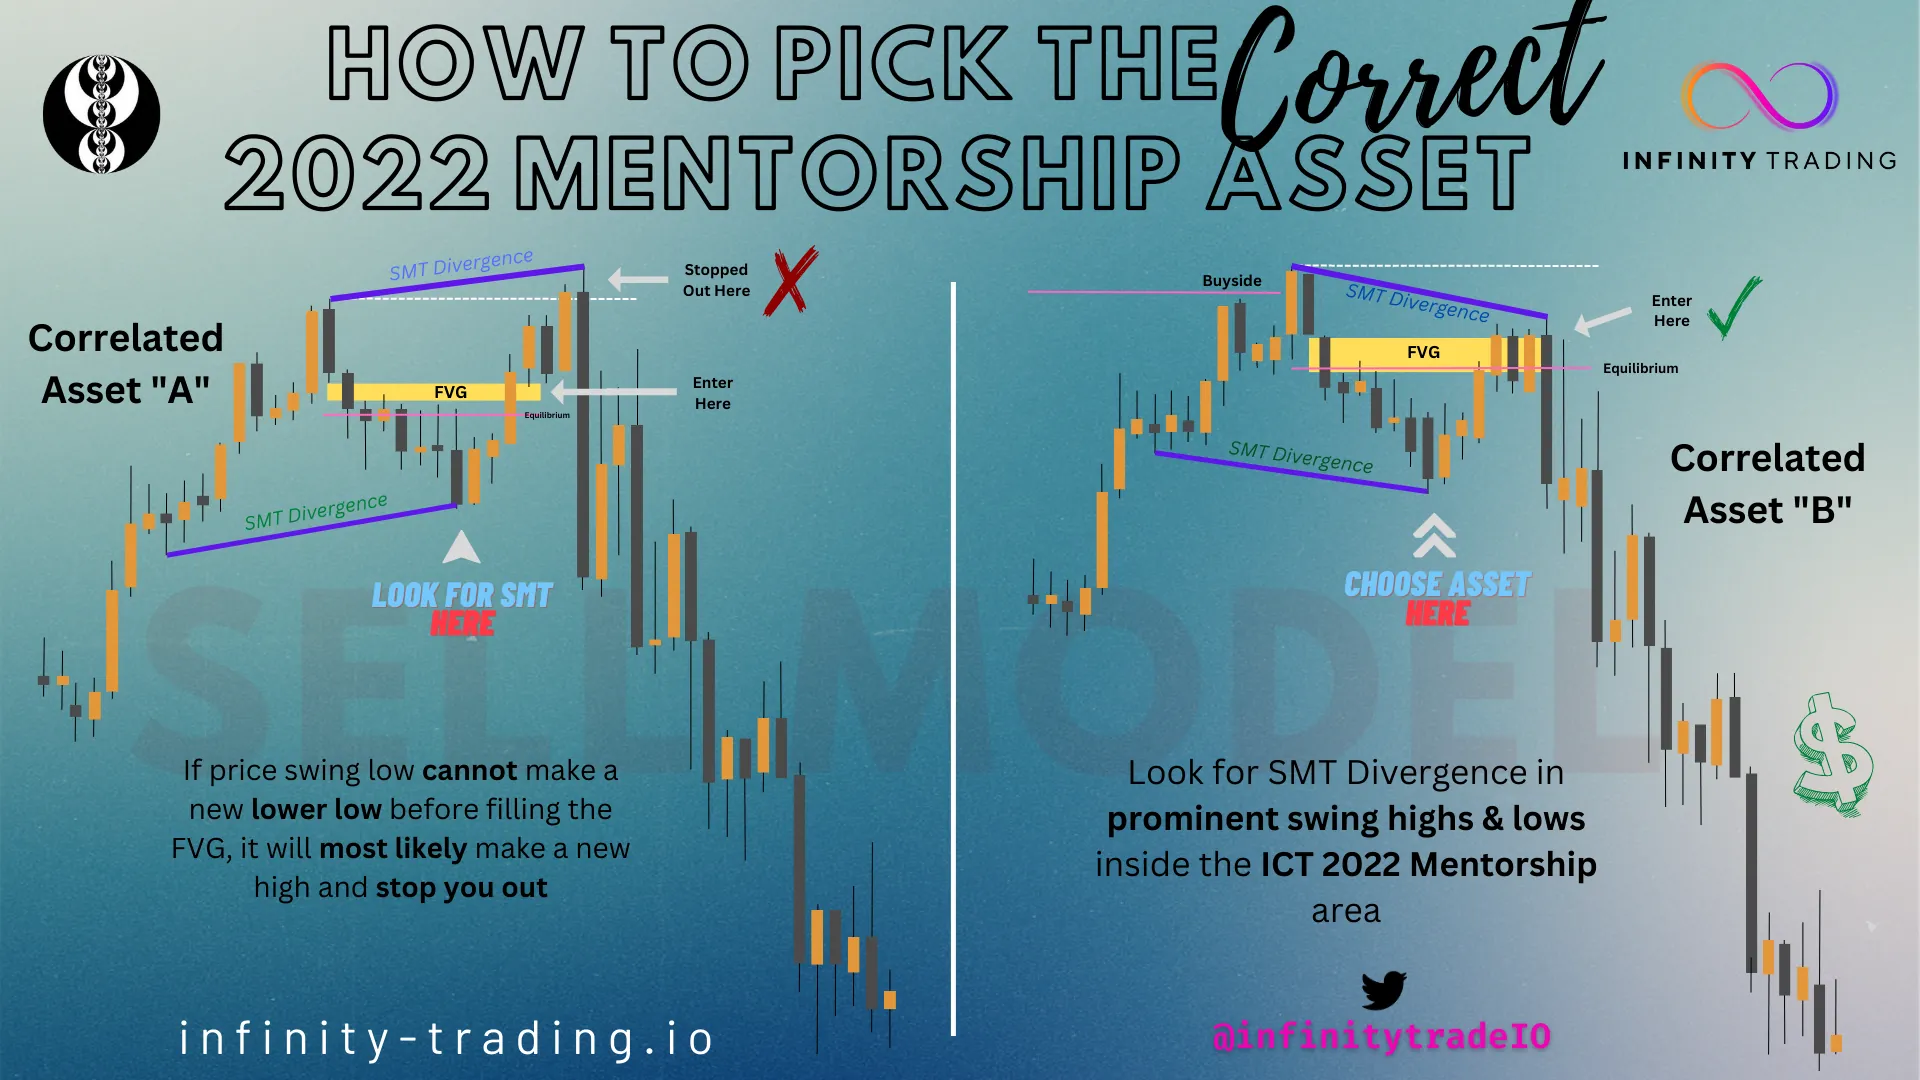 How To Pick the Correct Correlated Asset